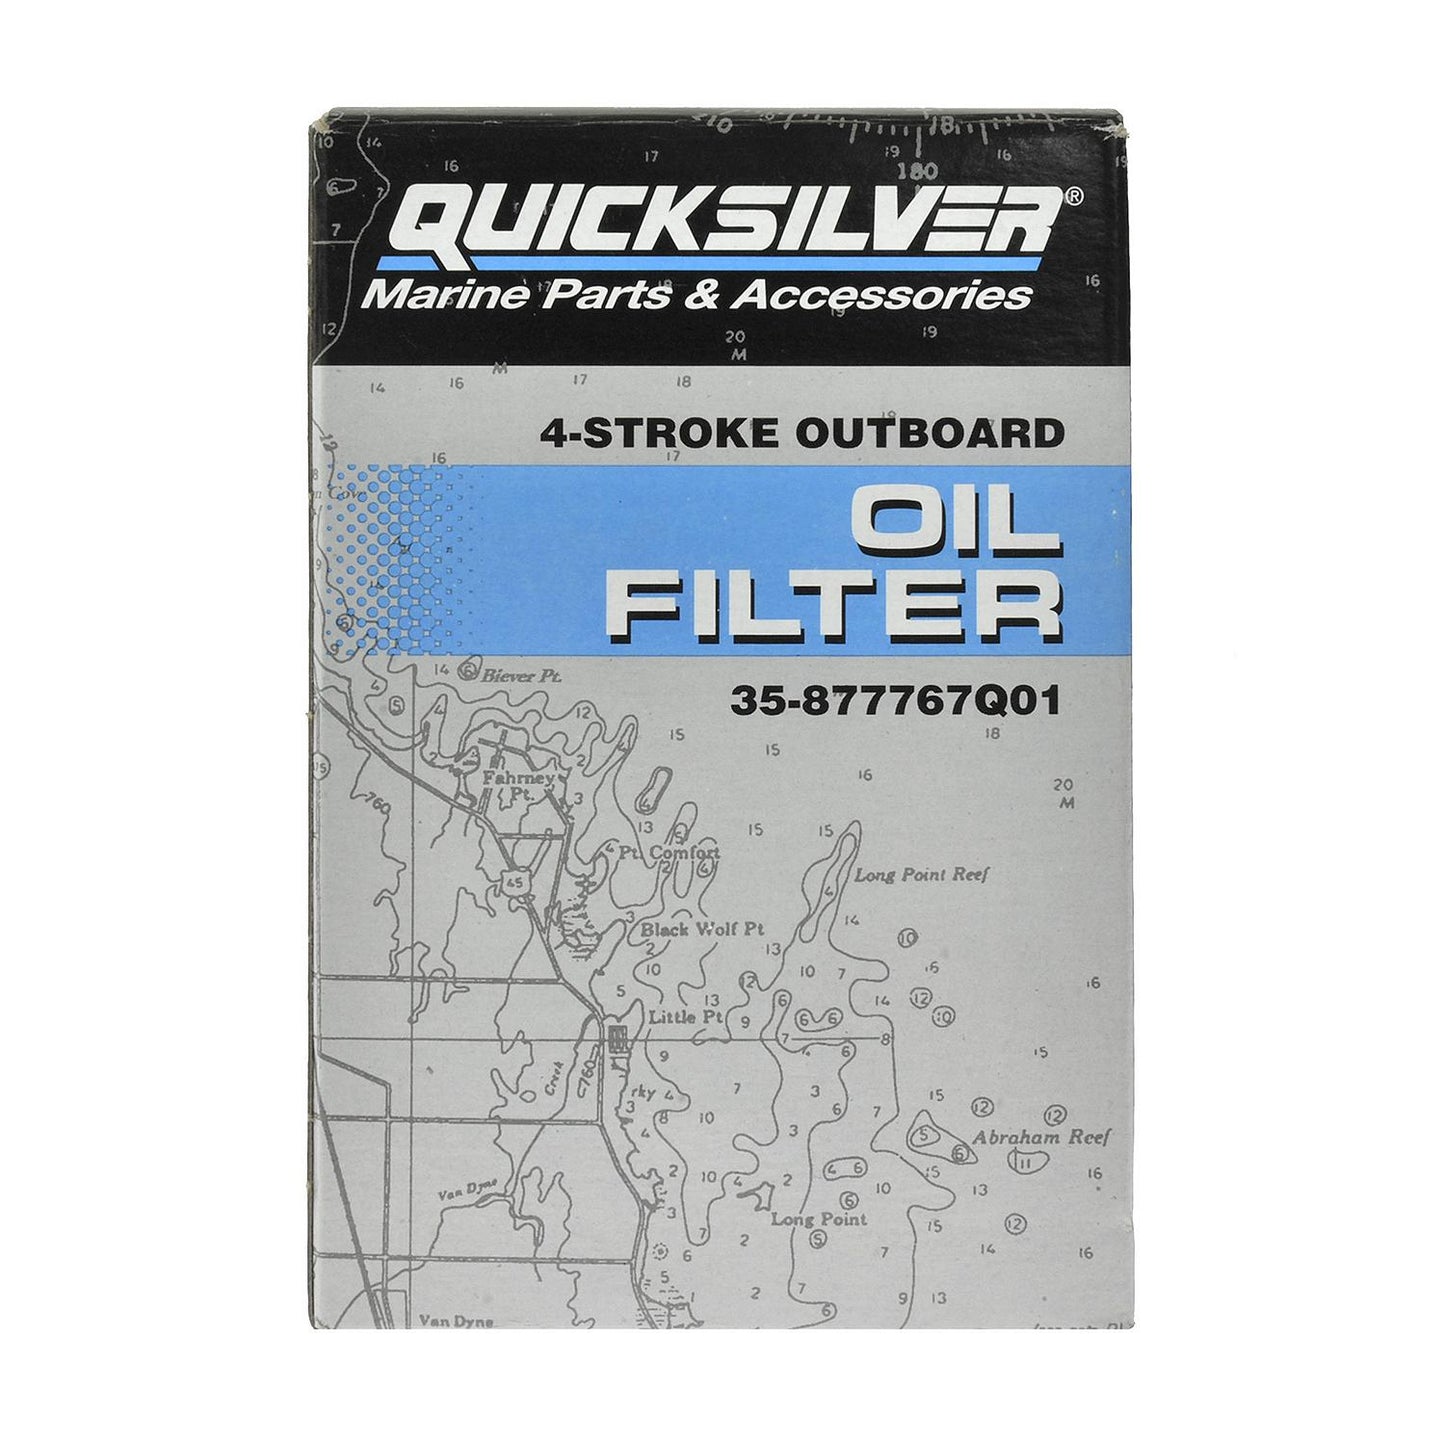 Quicksilver 877767Q01 Oil Filter for Verado In-Line 4-Cylinder 135-200 HP Outboards